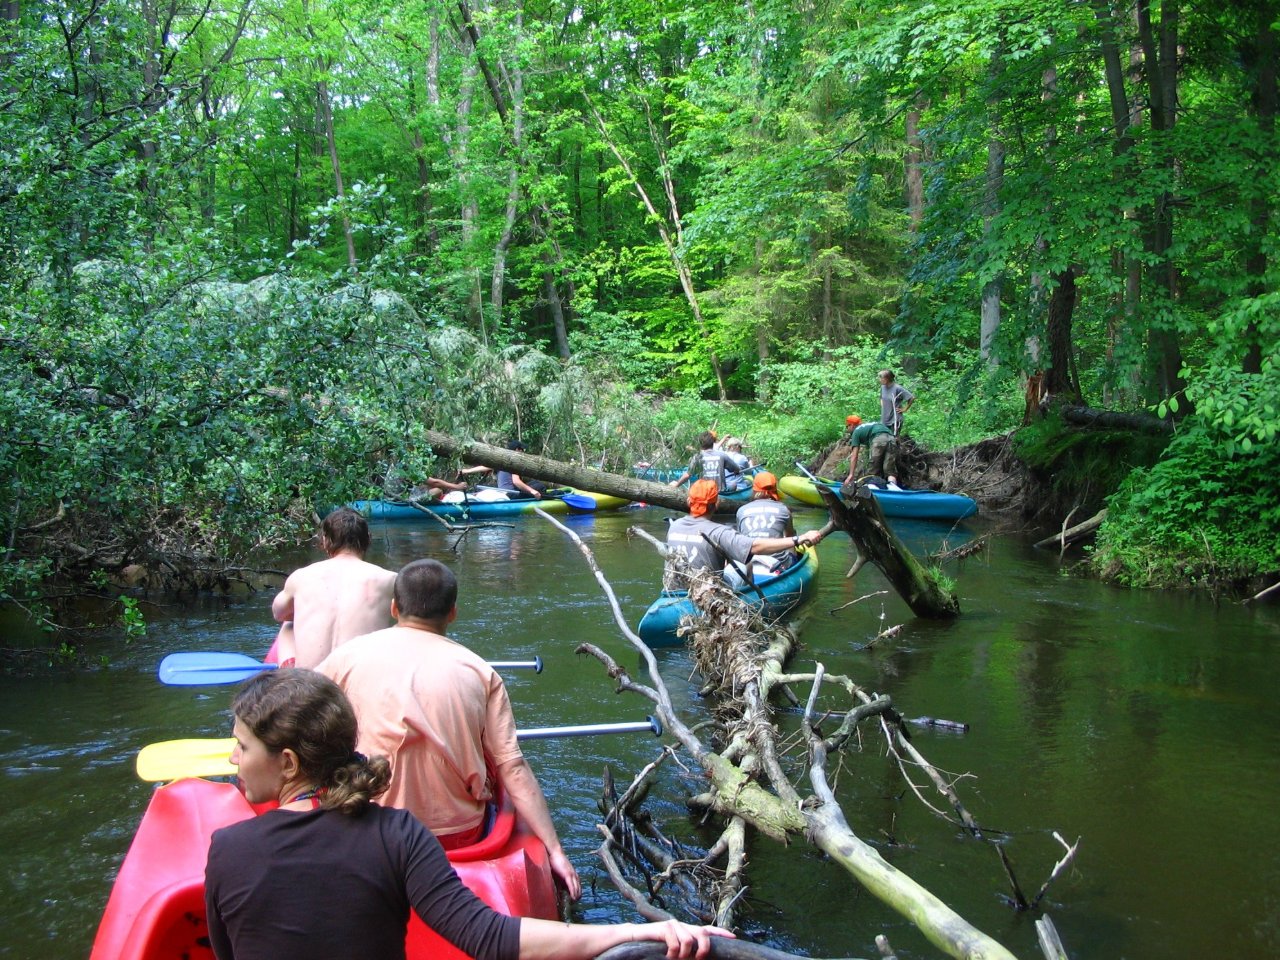 Canoeing on Lužnice river, The Czech Republic